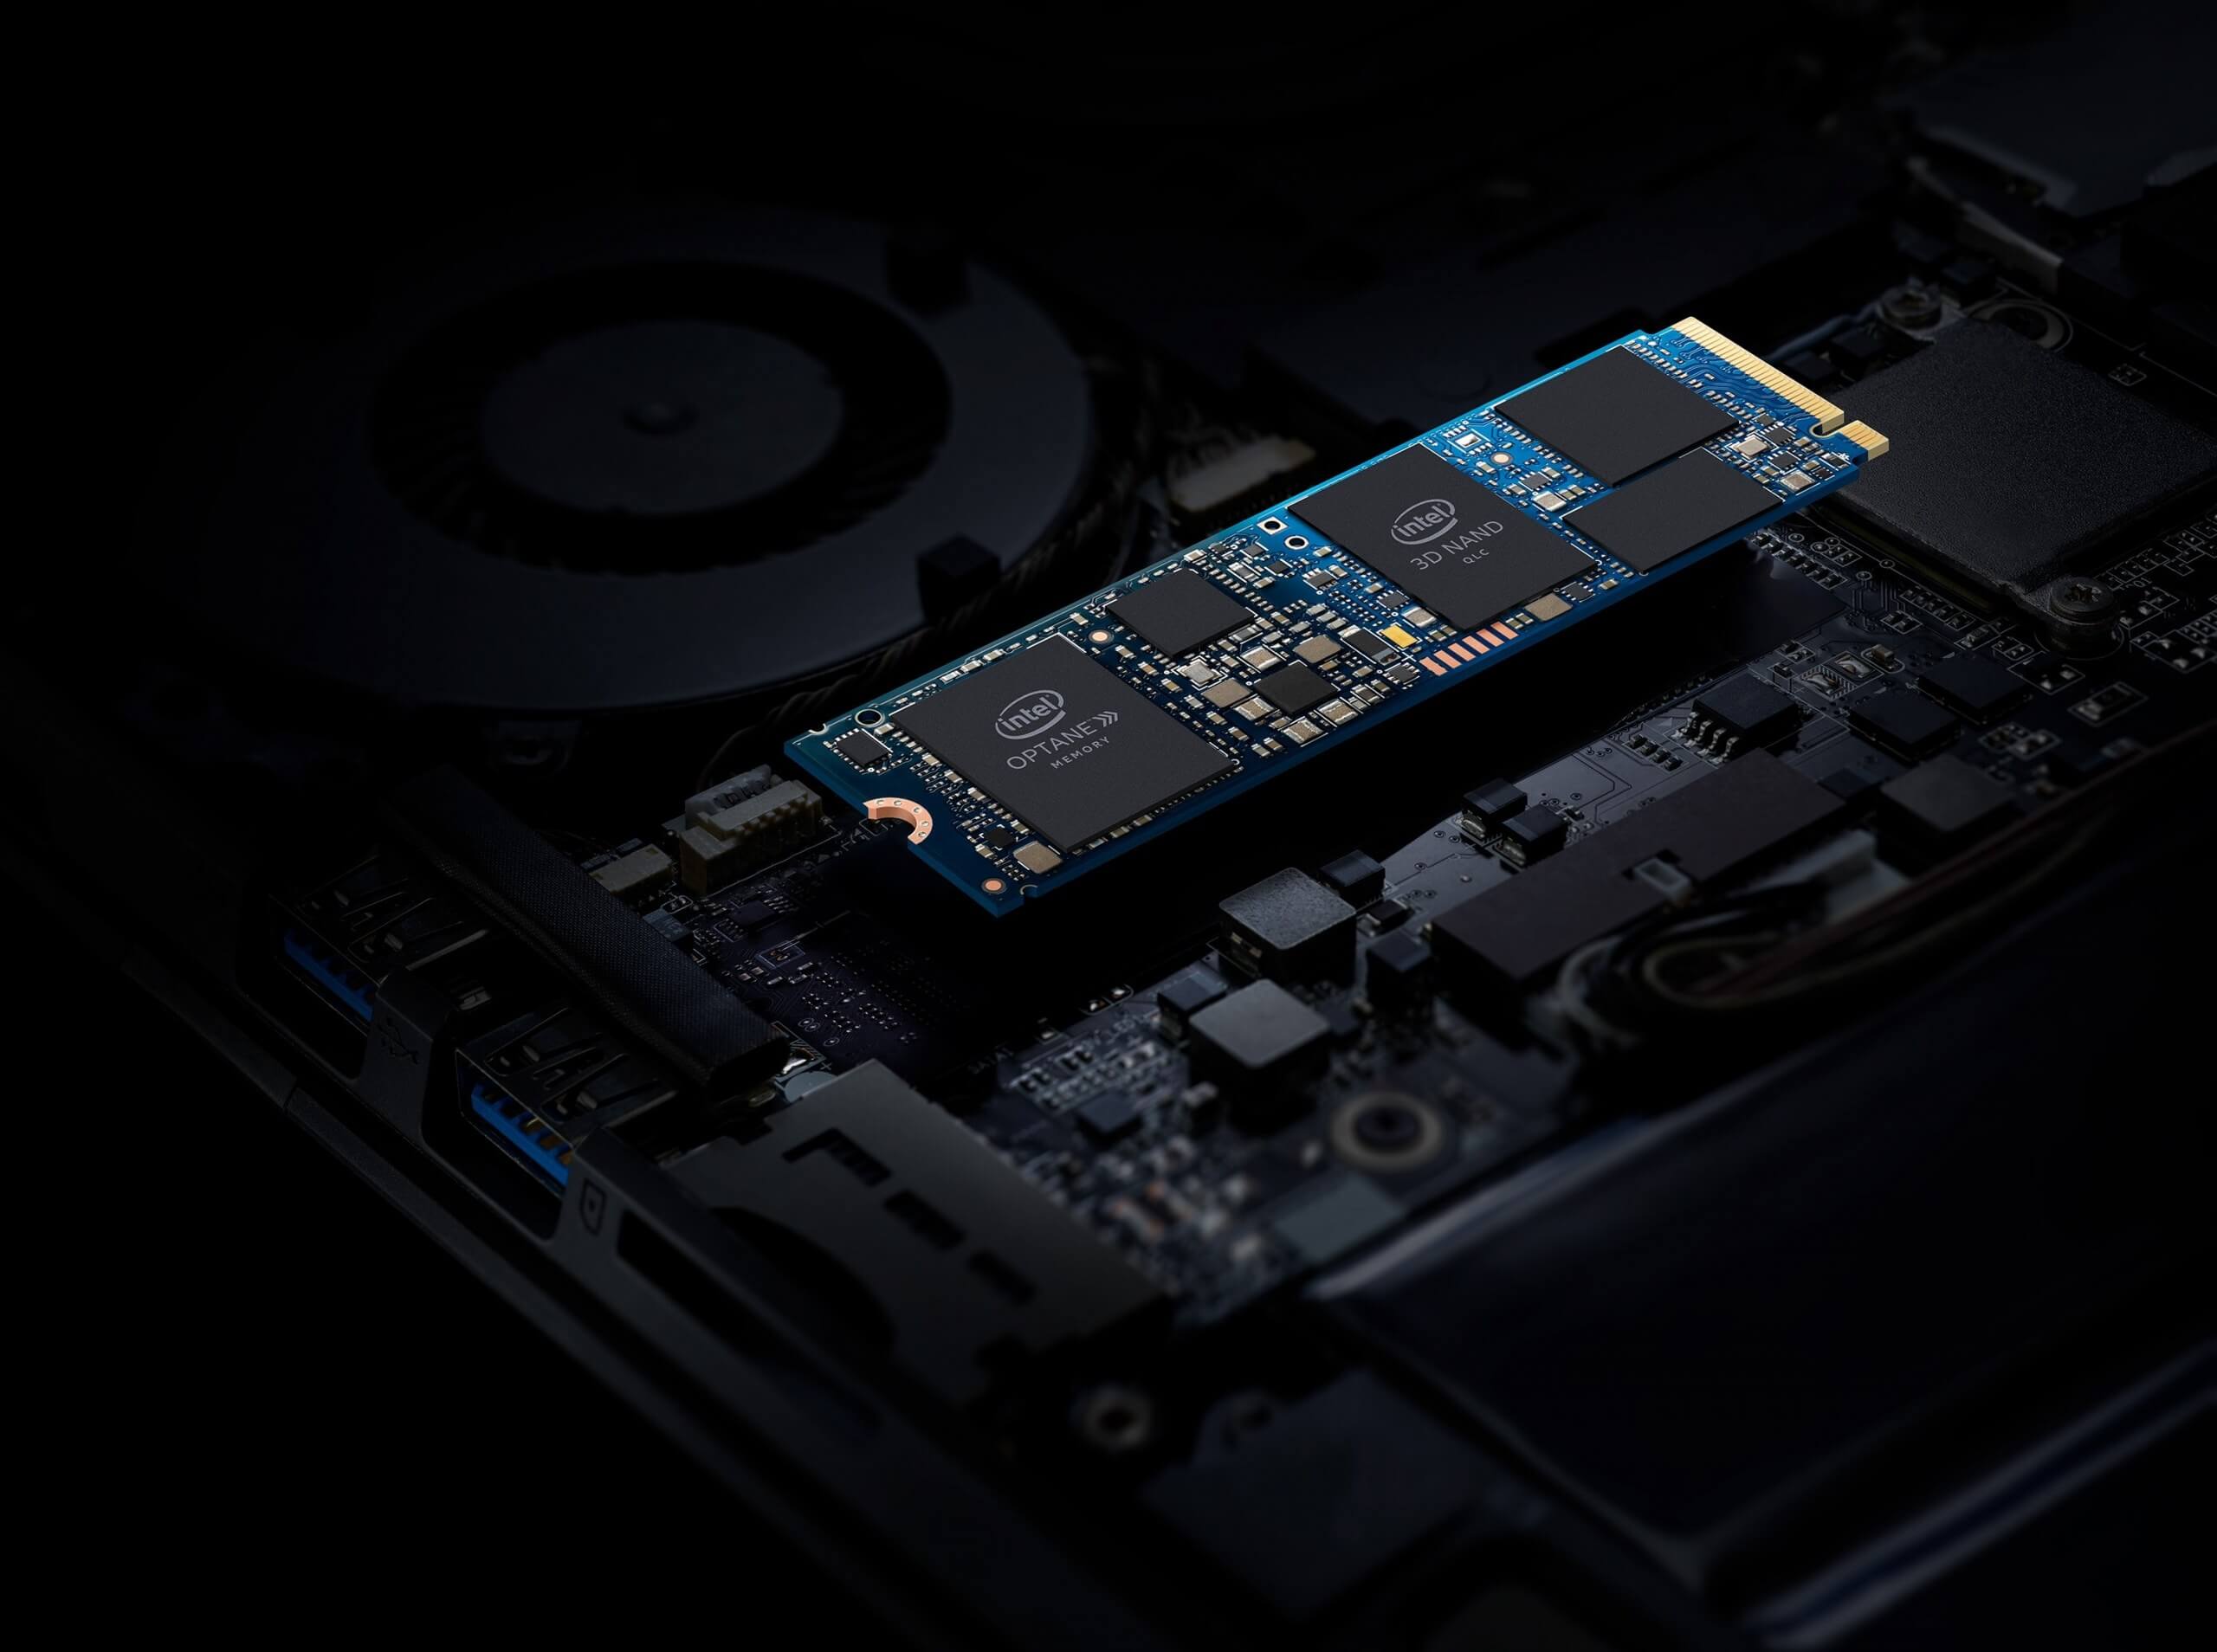 Intel shares specs for its ultra-fast Optane Memory H10 SSD